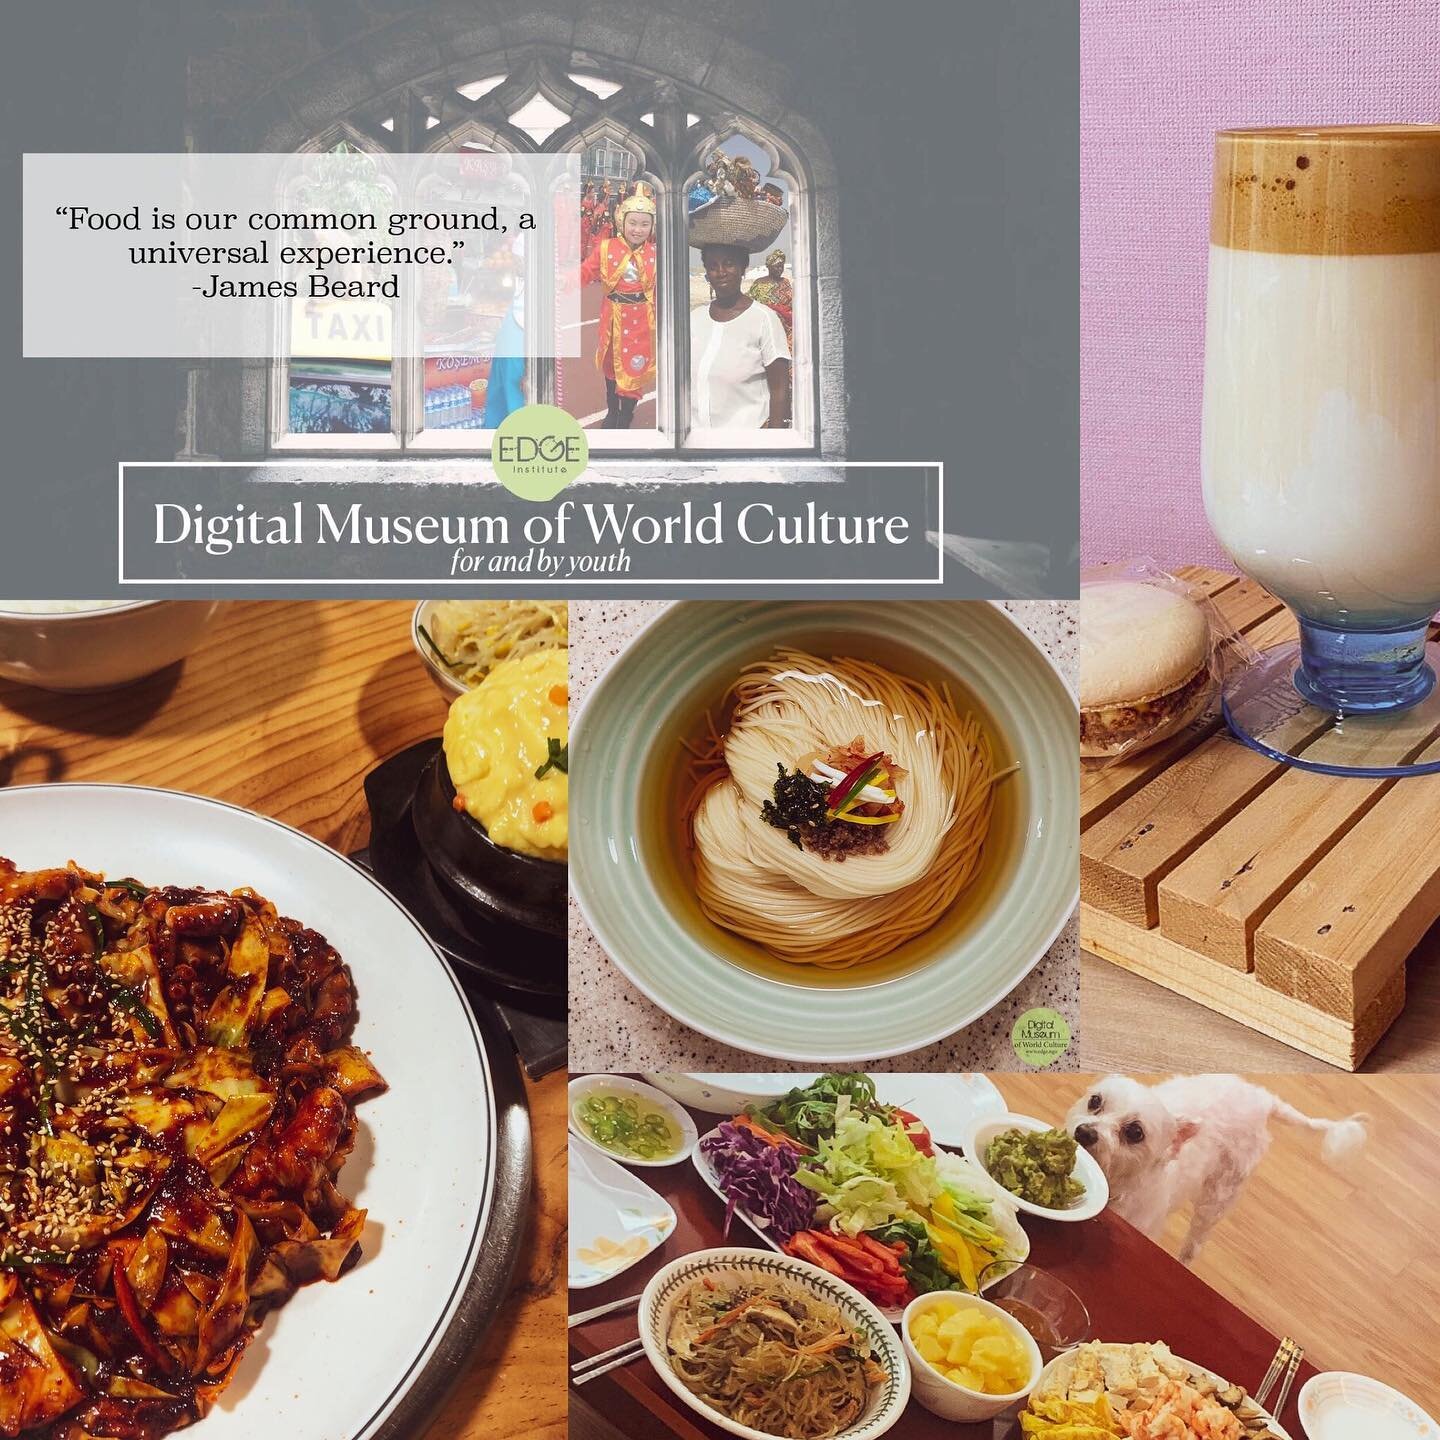 *Sneak Preview*
We have some exciting things coming @edgeinstitute on a bunch of fronts and this is a glimpse in the Digital Museum of World Culture that will be unveiled soon. In the meantime, here&rsquo;s a glimpse into meals through the eyes of yo